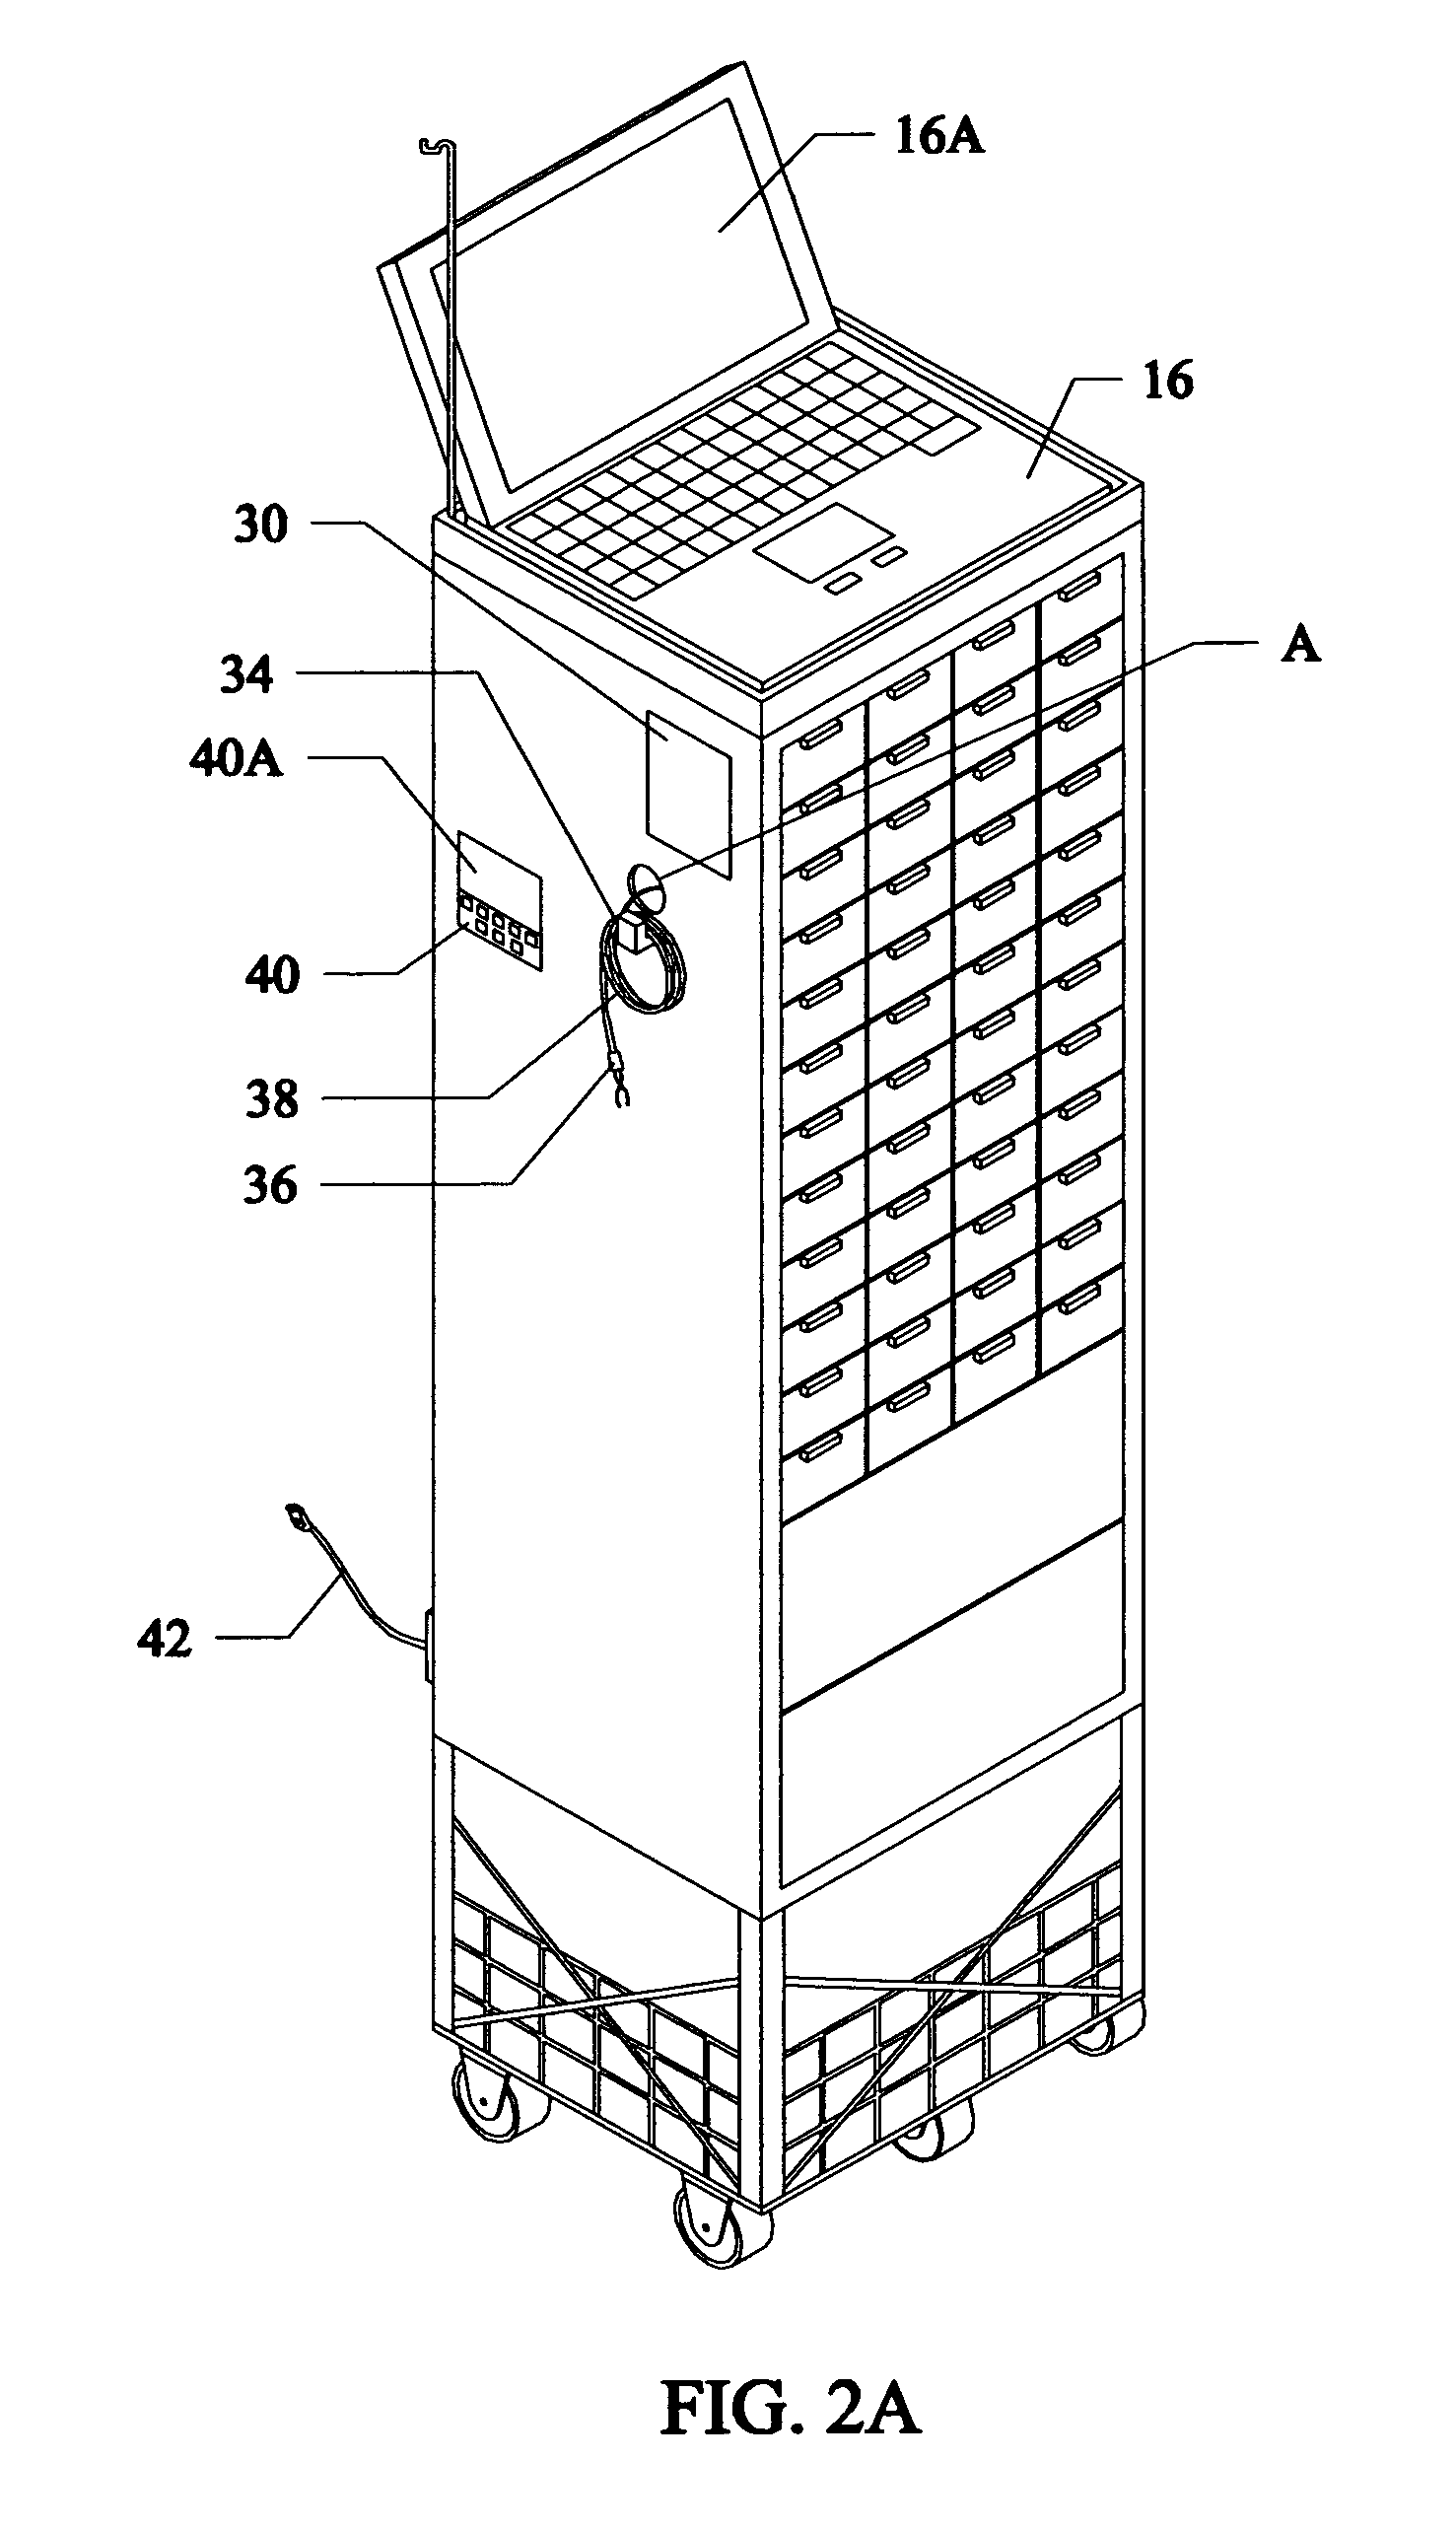 Automated system and device for management and dispensation of respiratory therapy medications